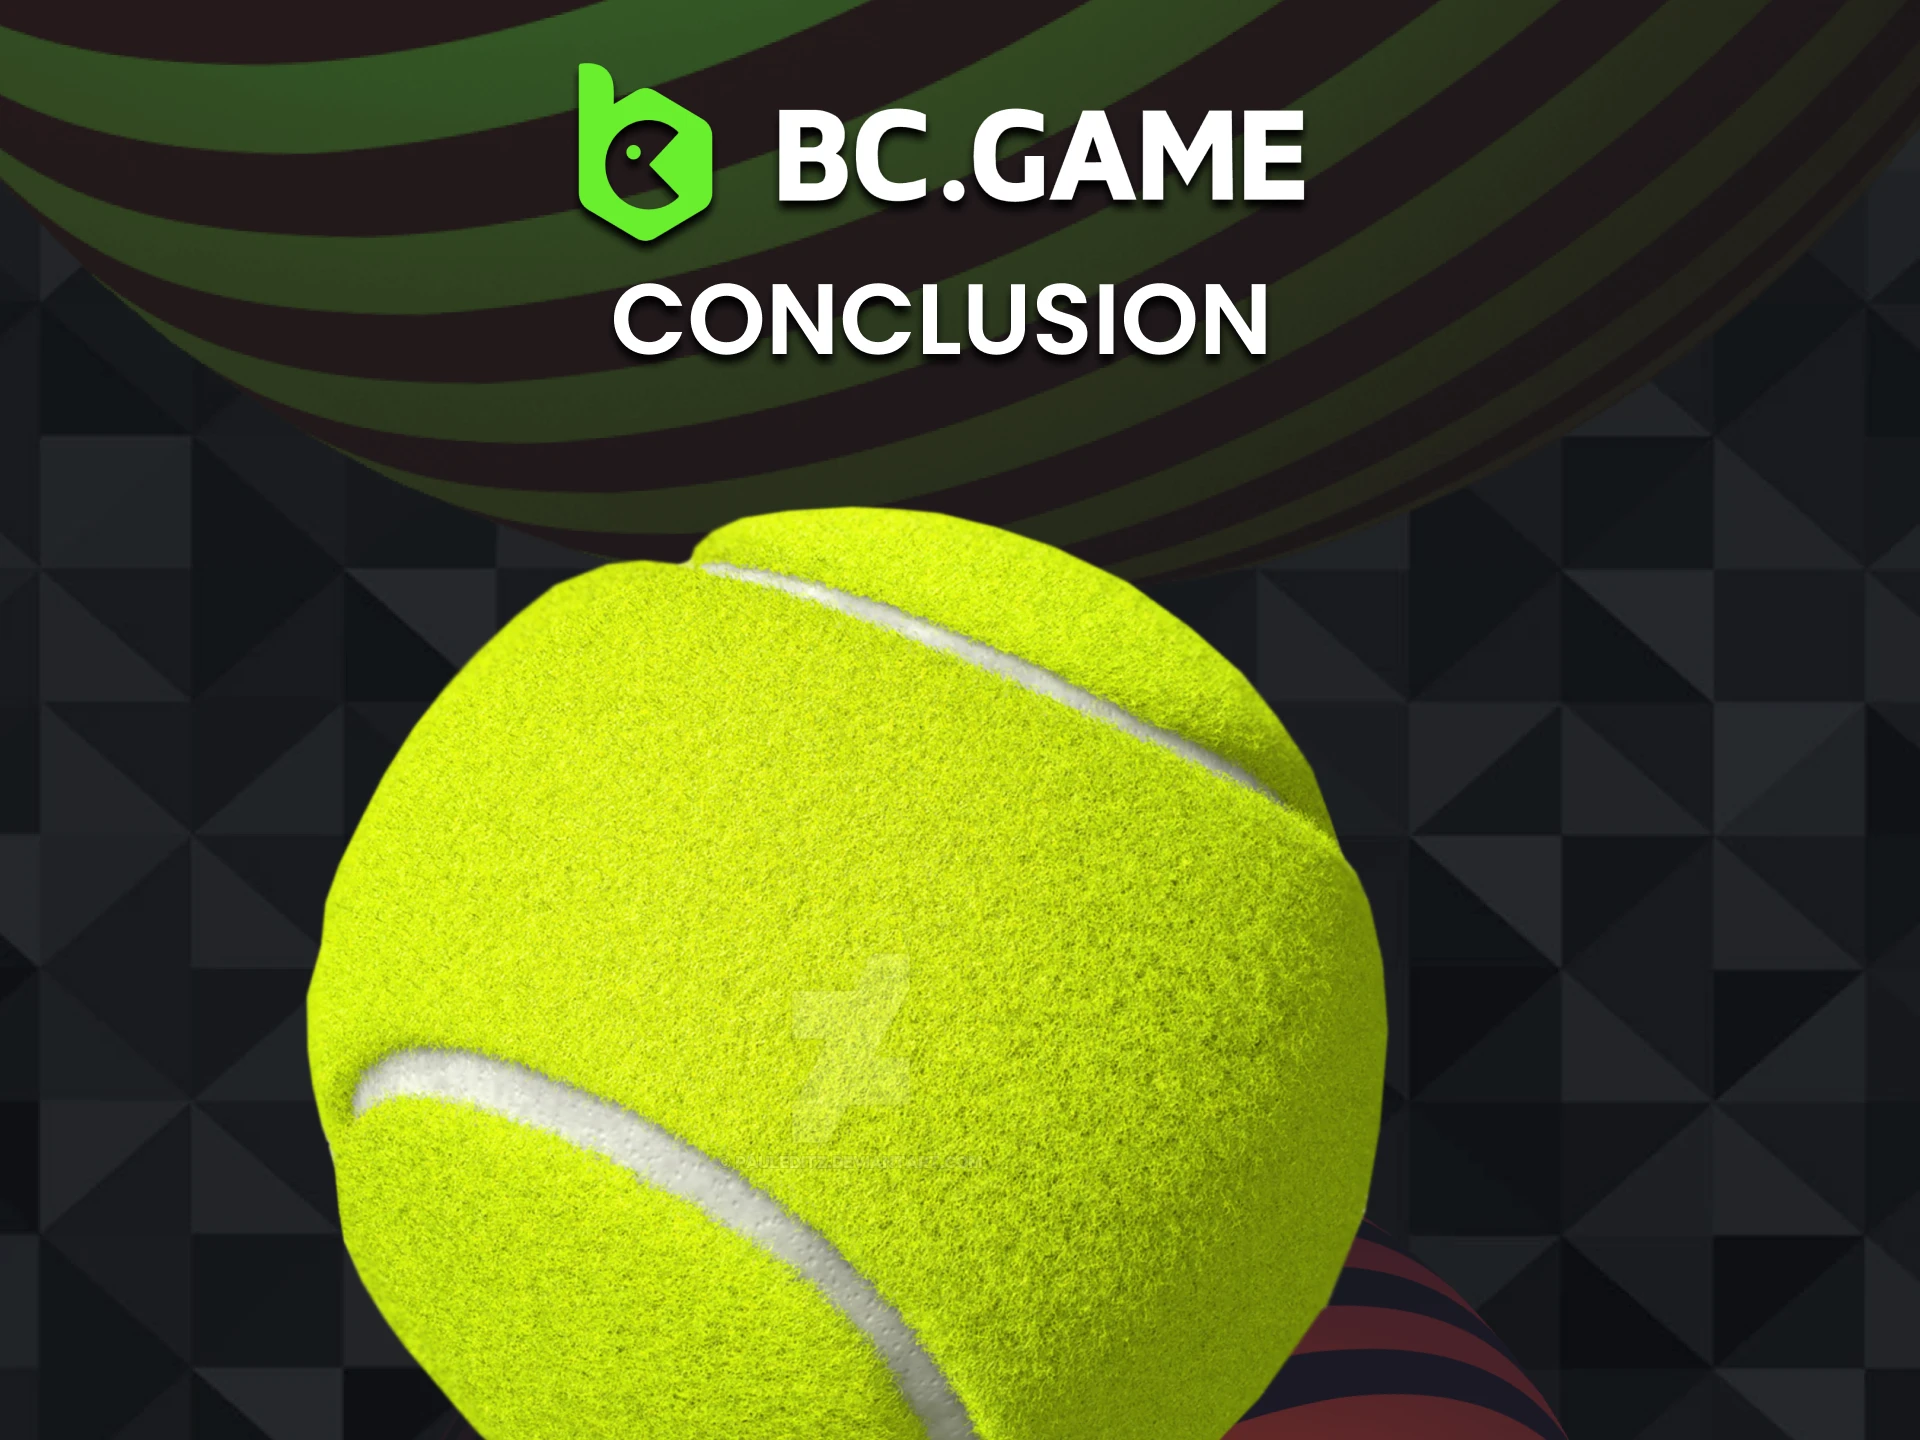 BC Game is the right choice for tennis betting.